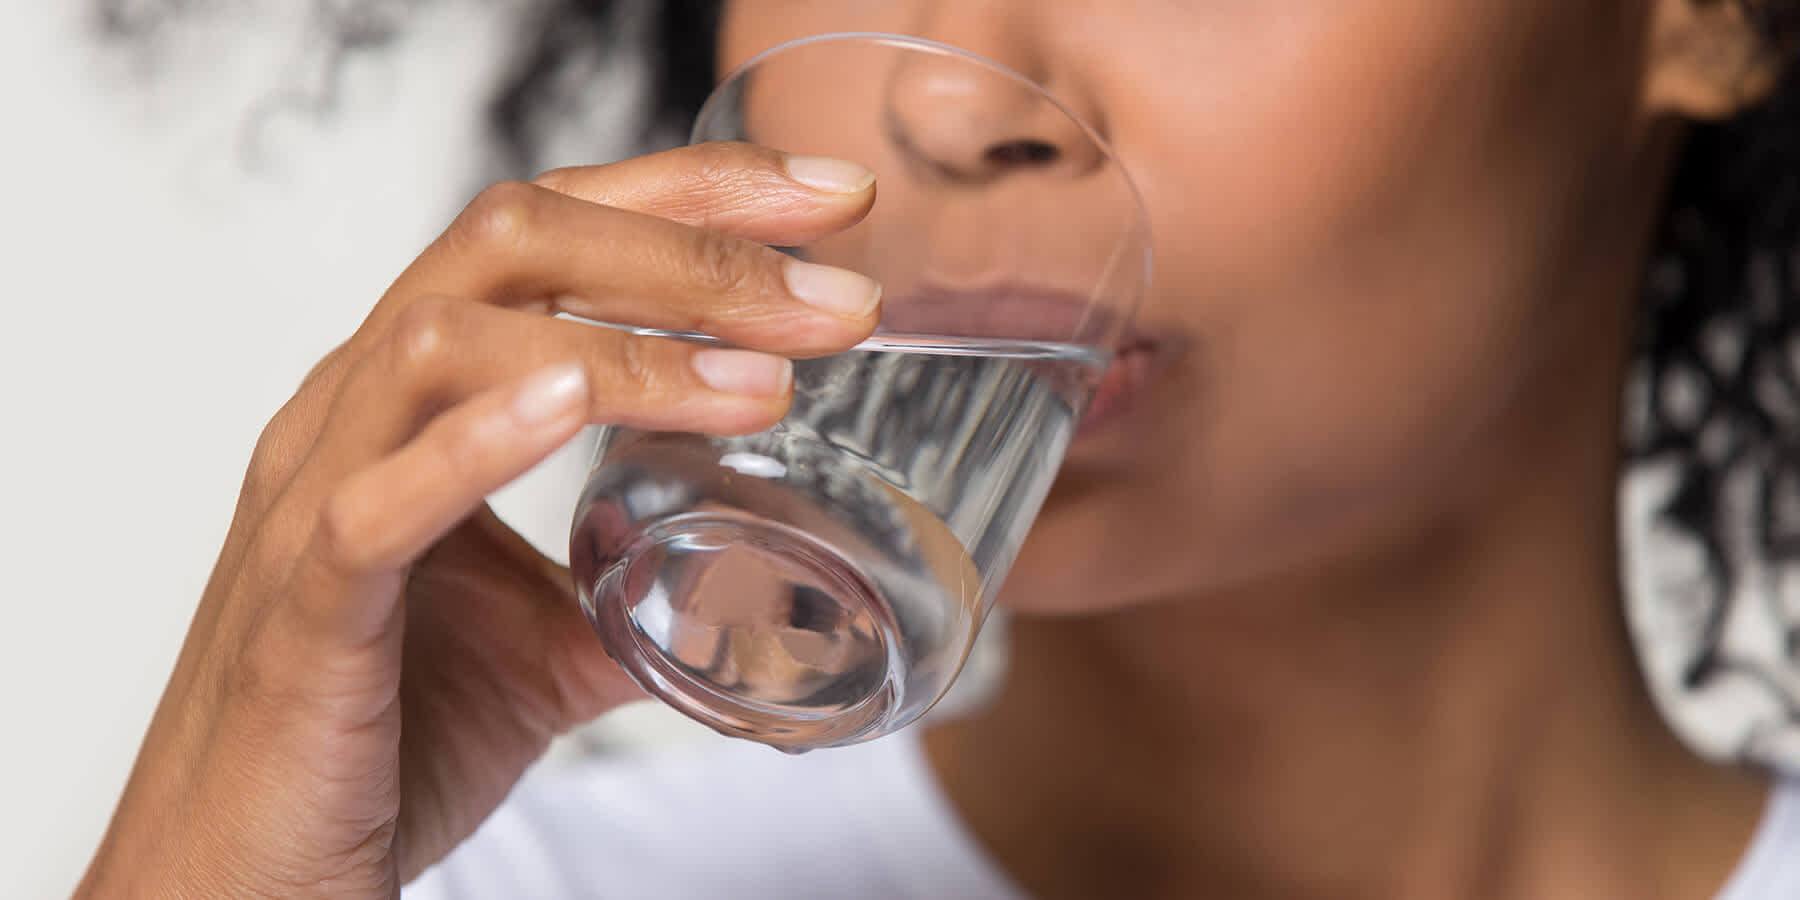 Thirsty woman with diabetes sipping glass of water